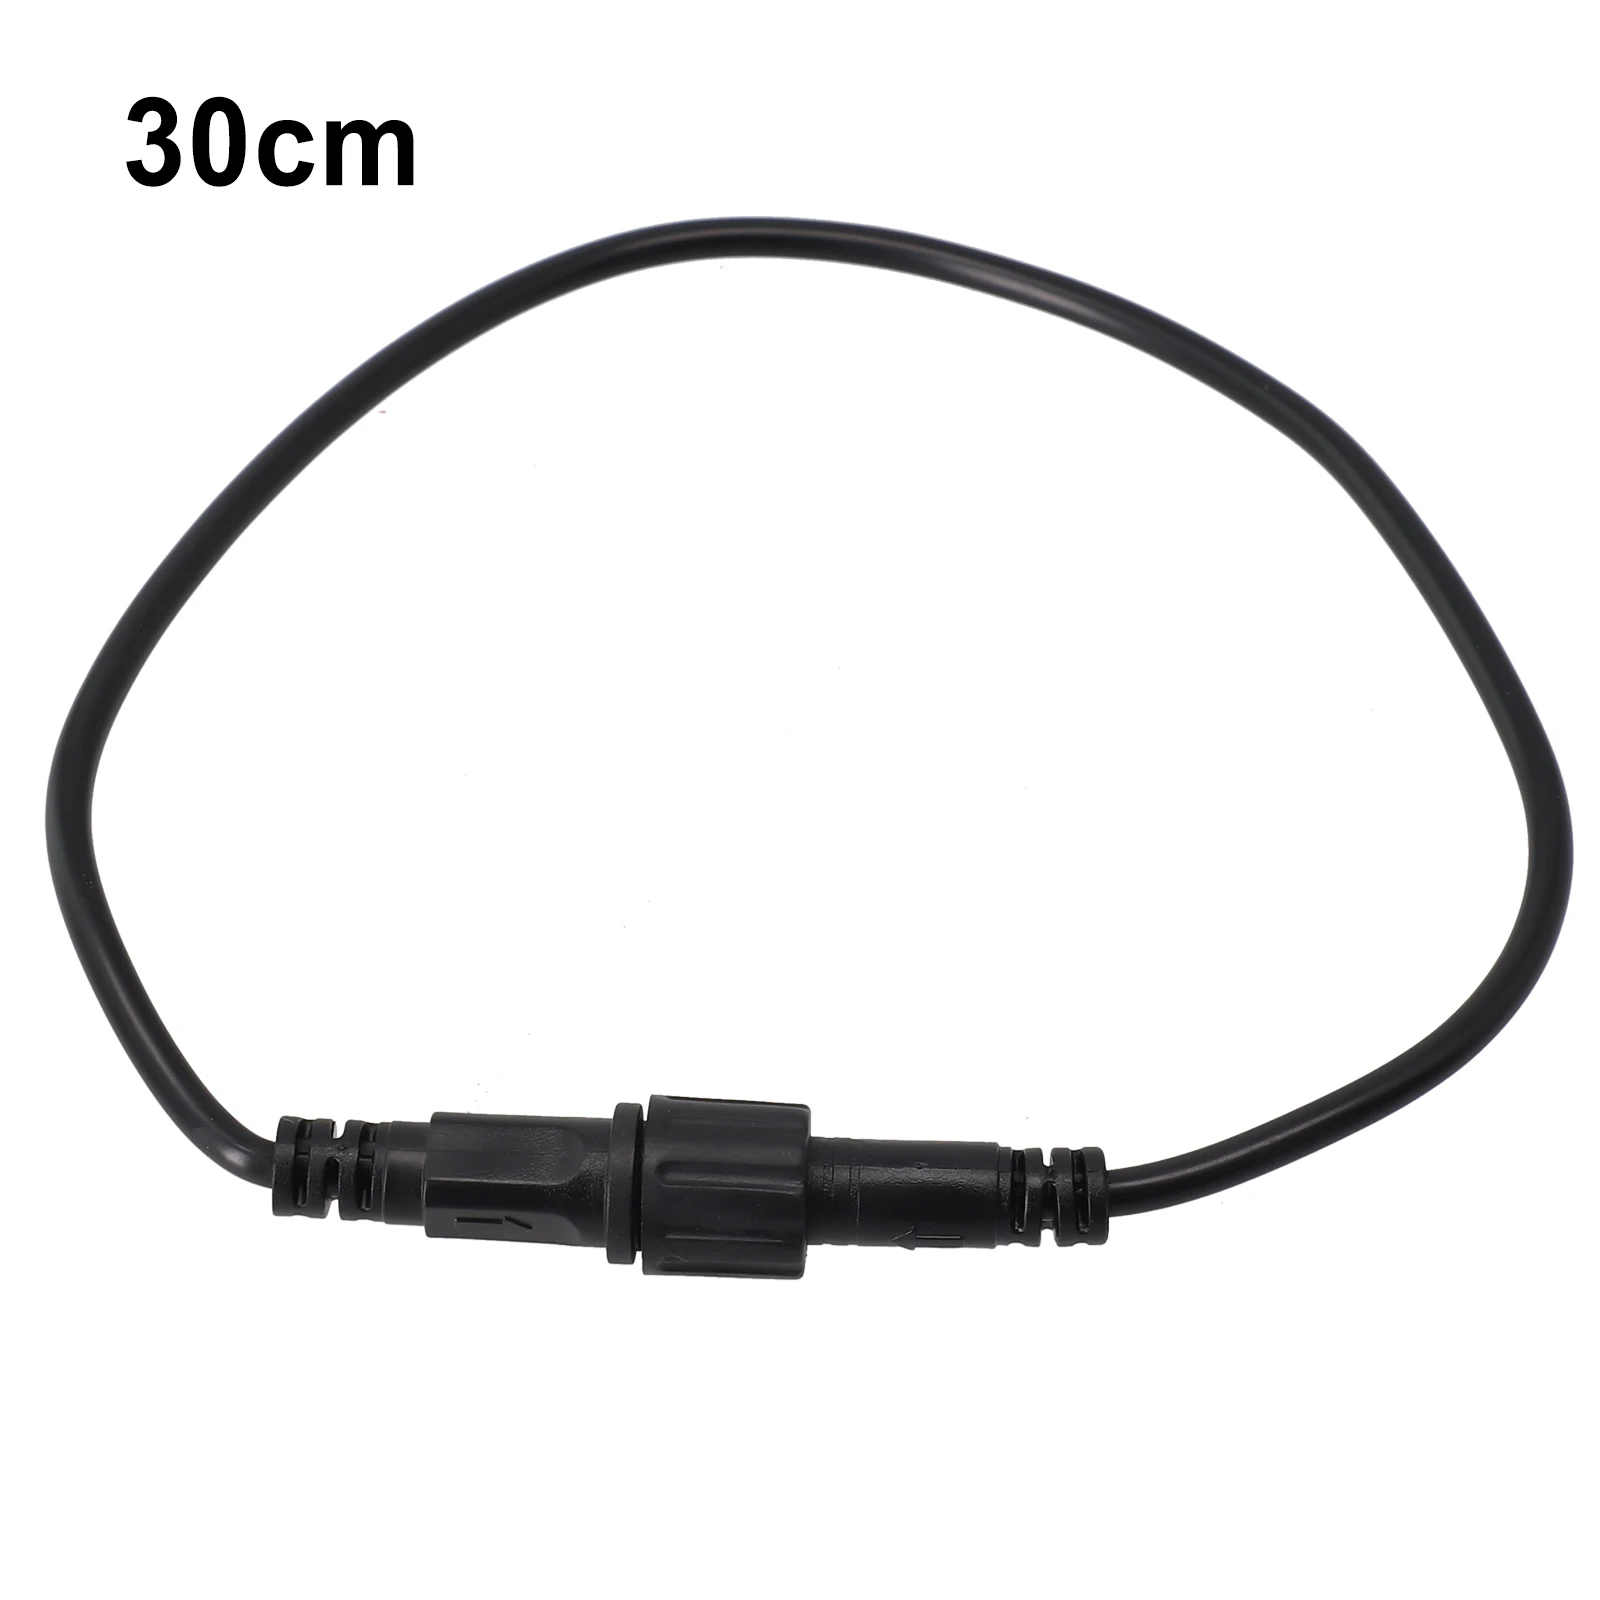 

Improve Your Ebike's Speed and Accuracy with For BAFANG Drive Motor's Extension Cable for BBS01 BBS02 forBBSHD